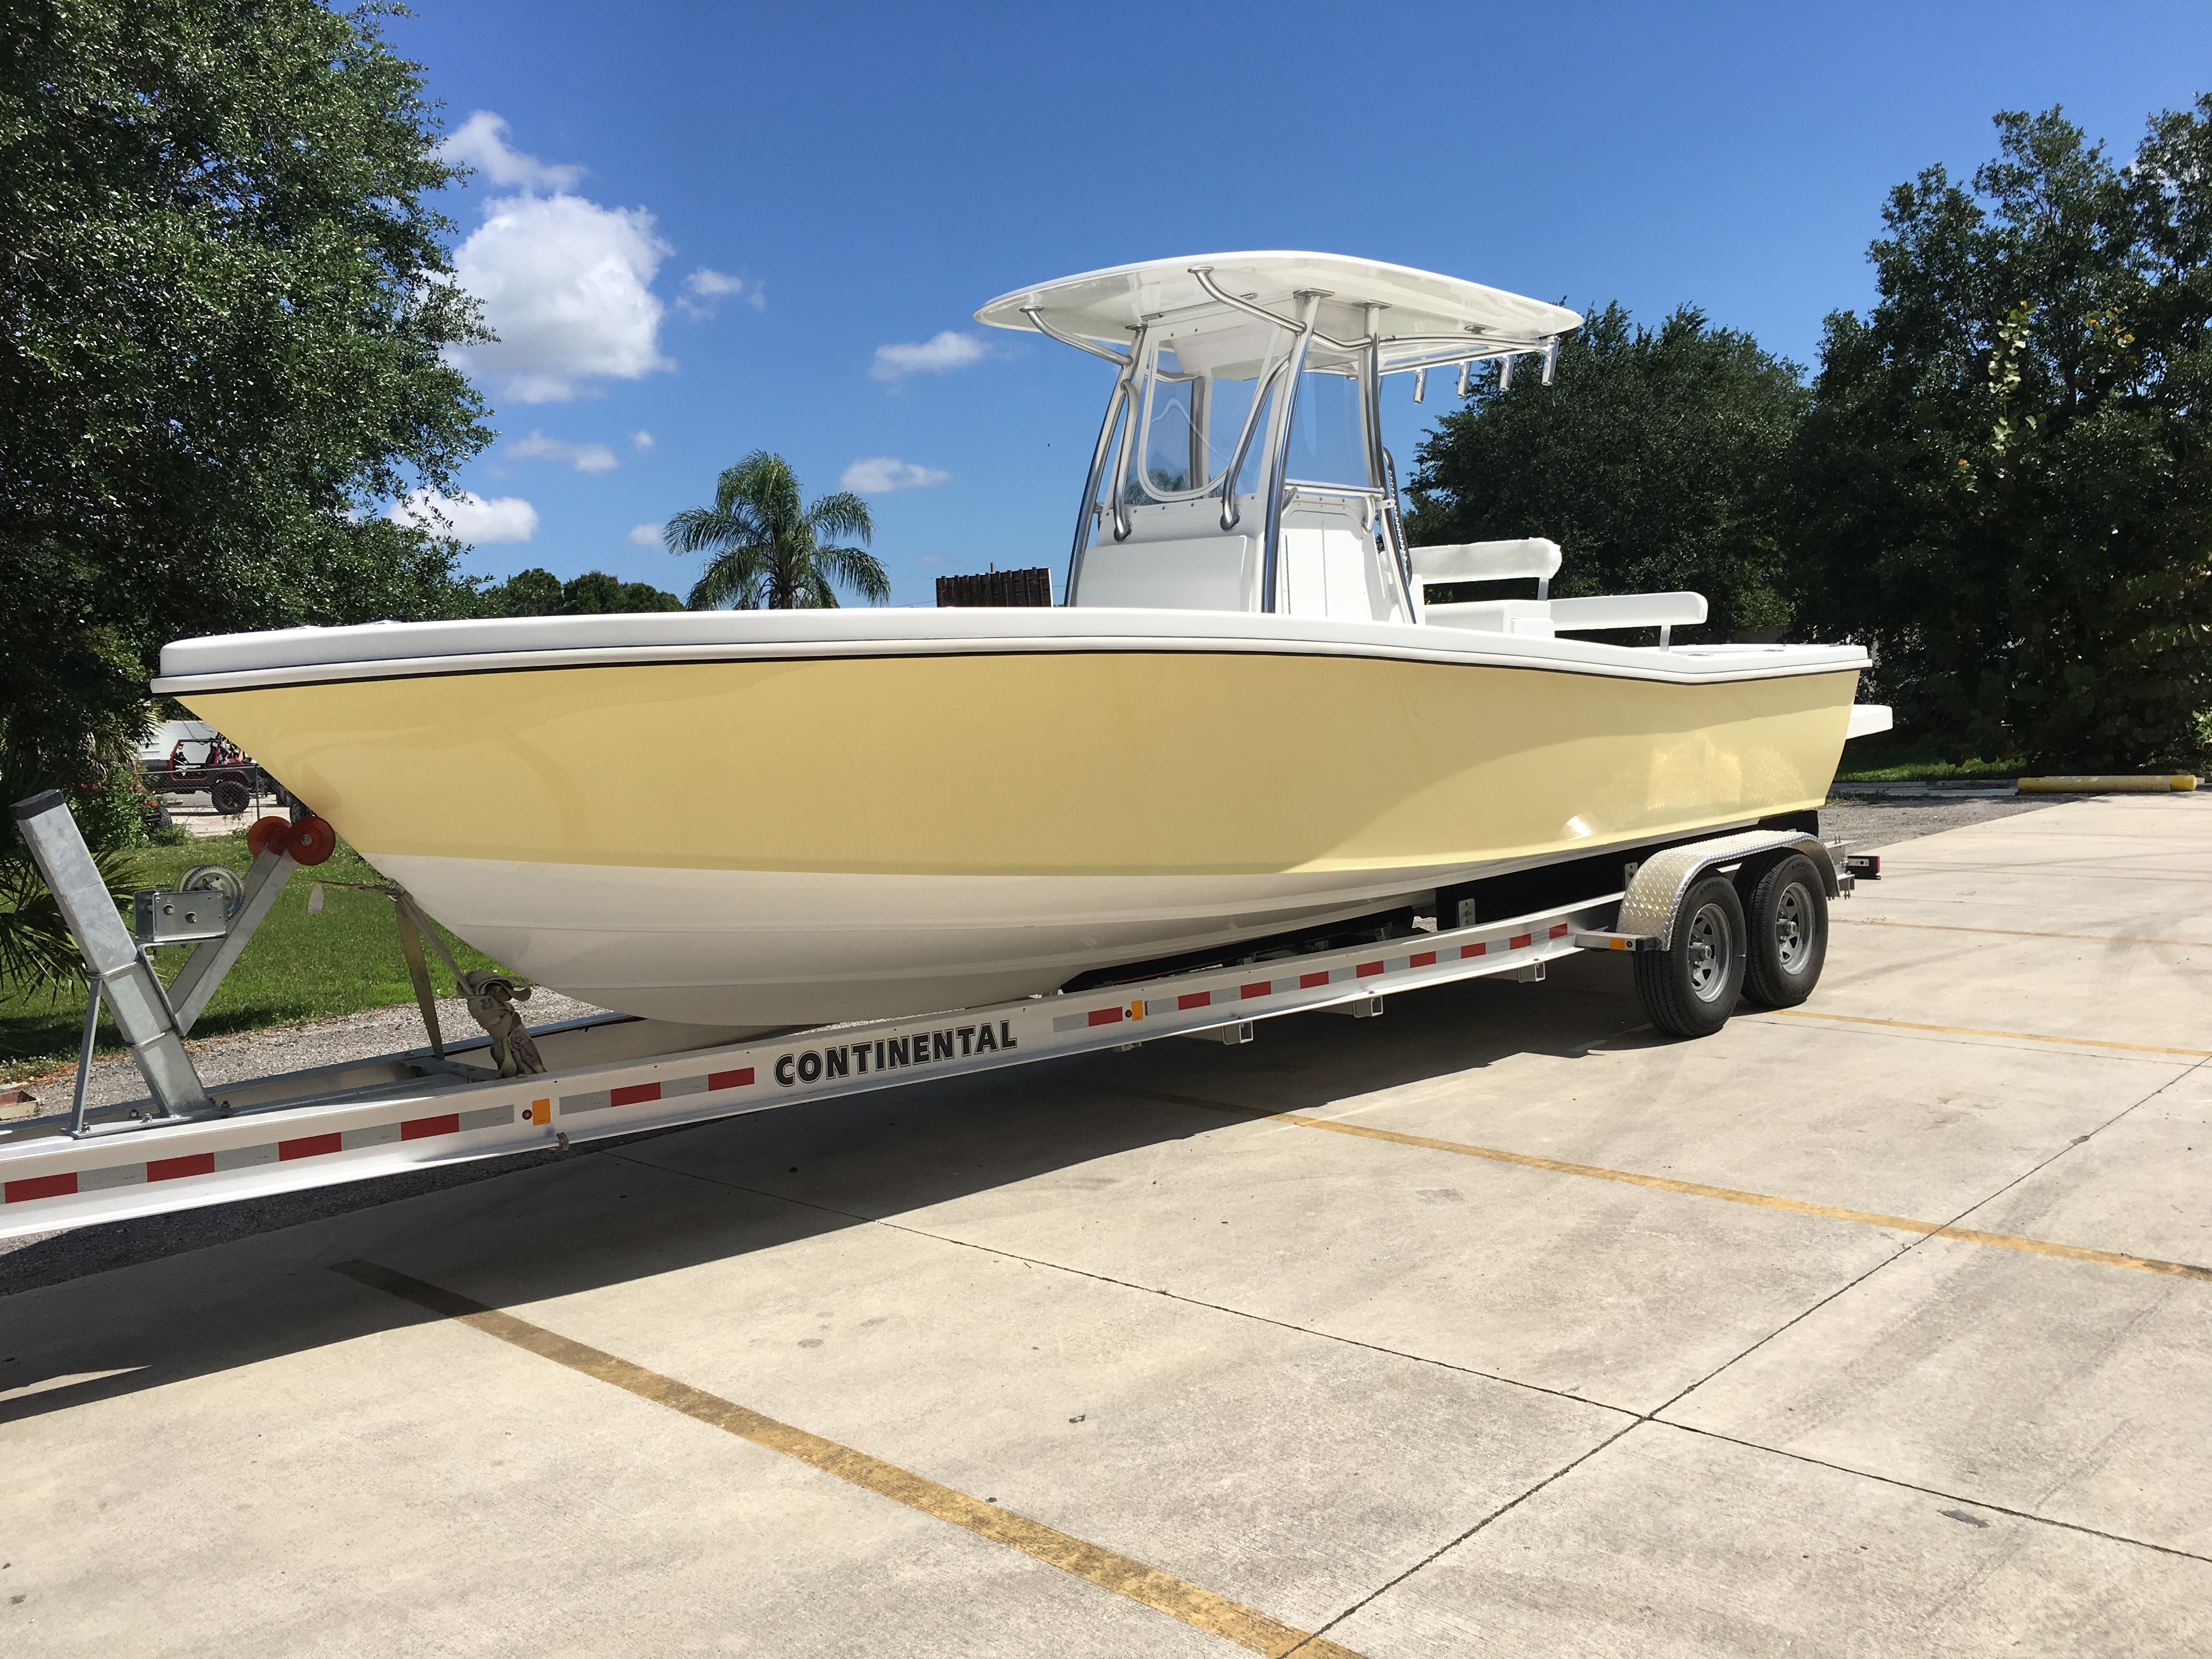 Factory Showroom Boats For Sale Florida